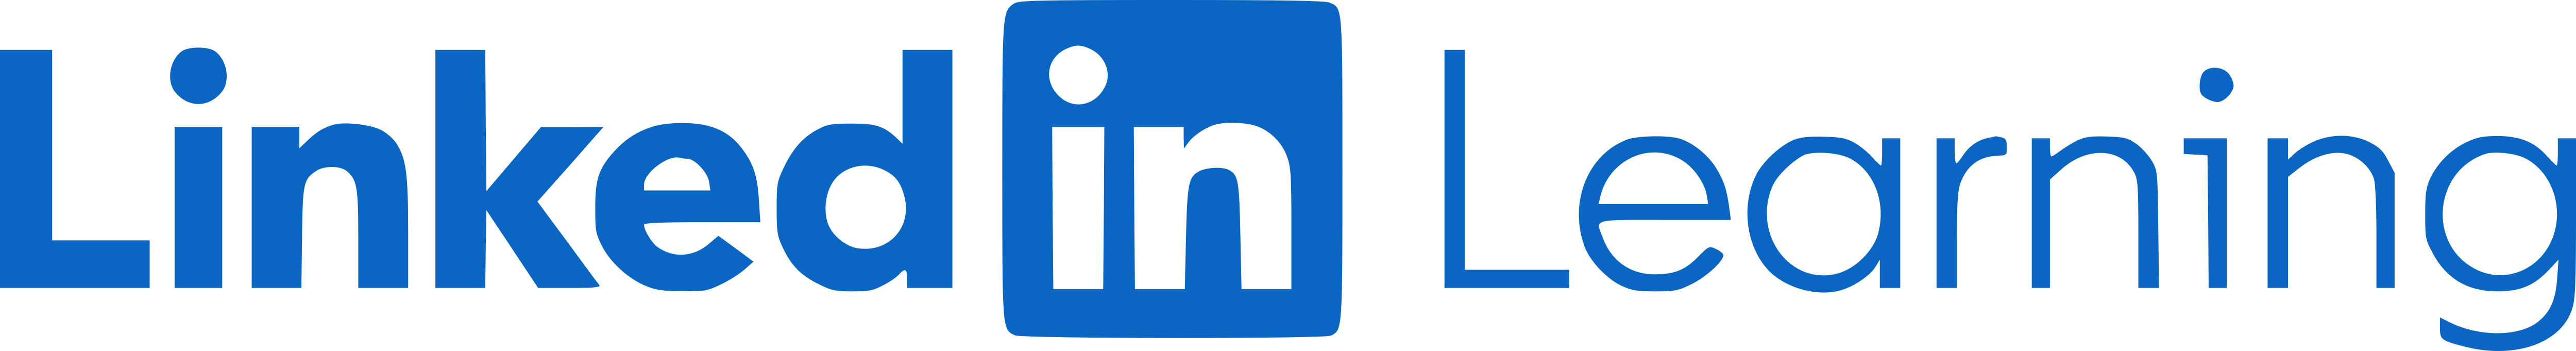 LinkedIn Learning Solution | Online Learning for Your Business